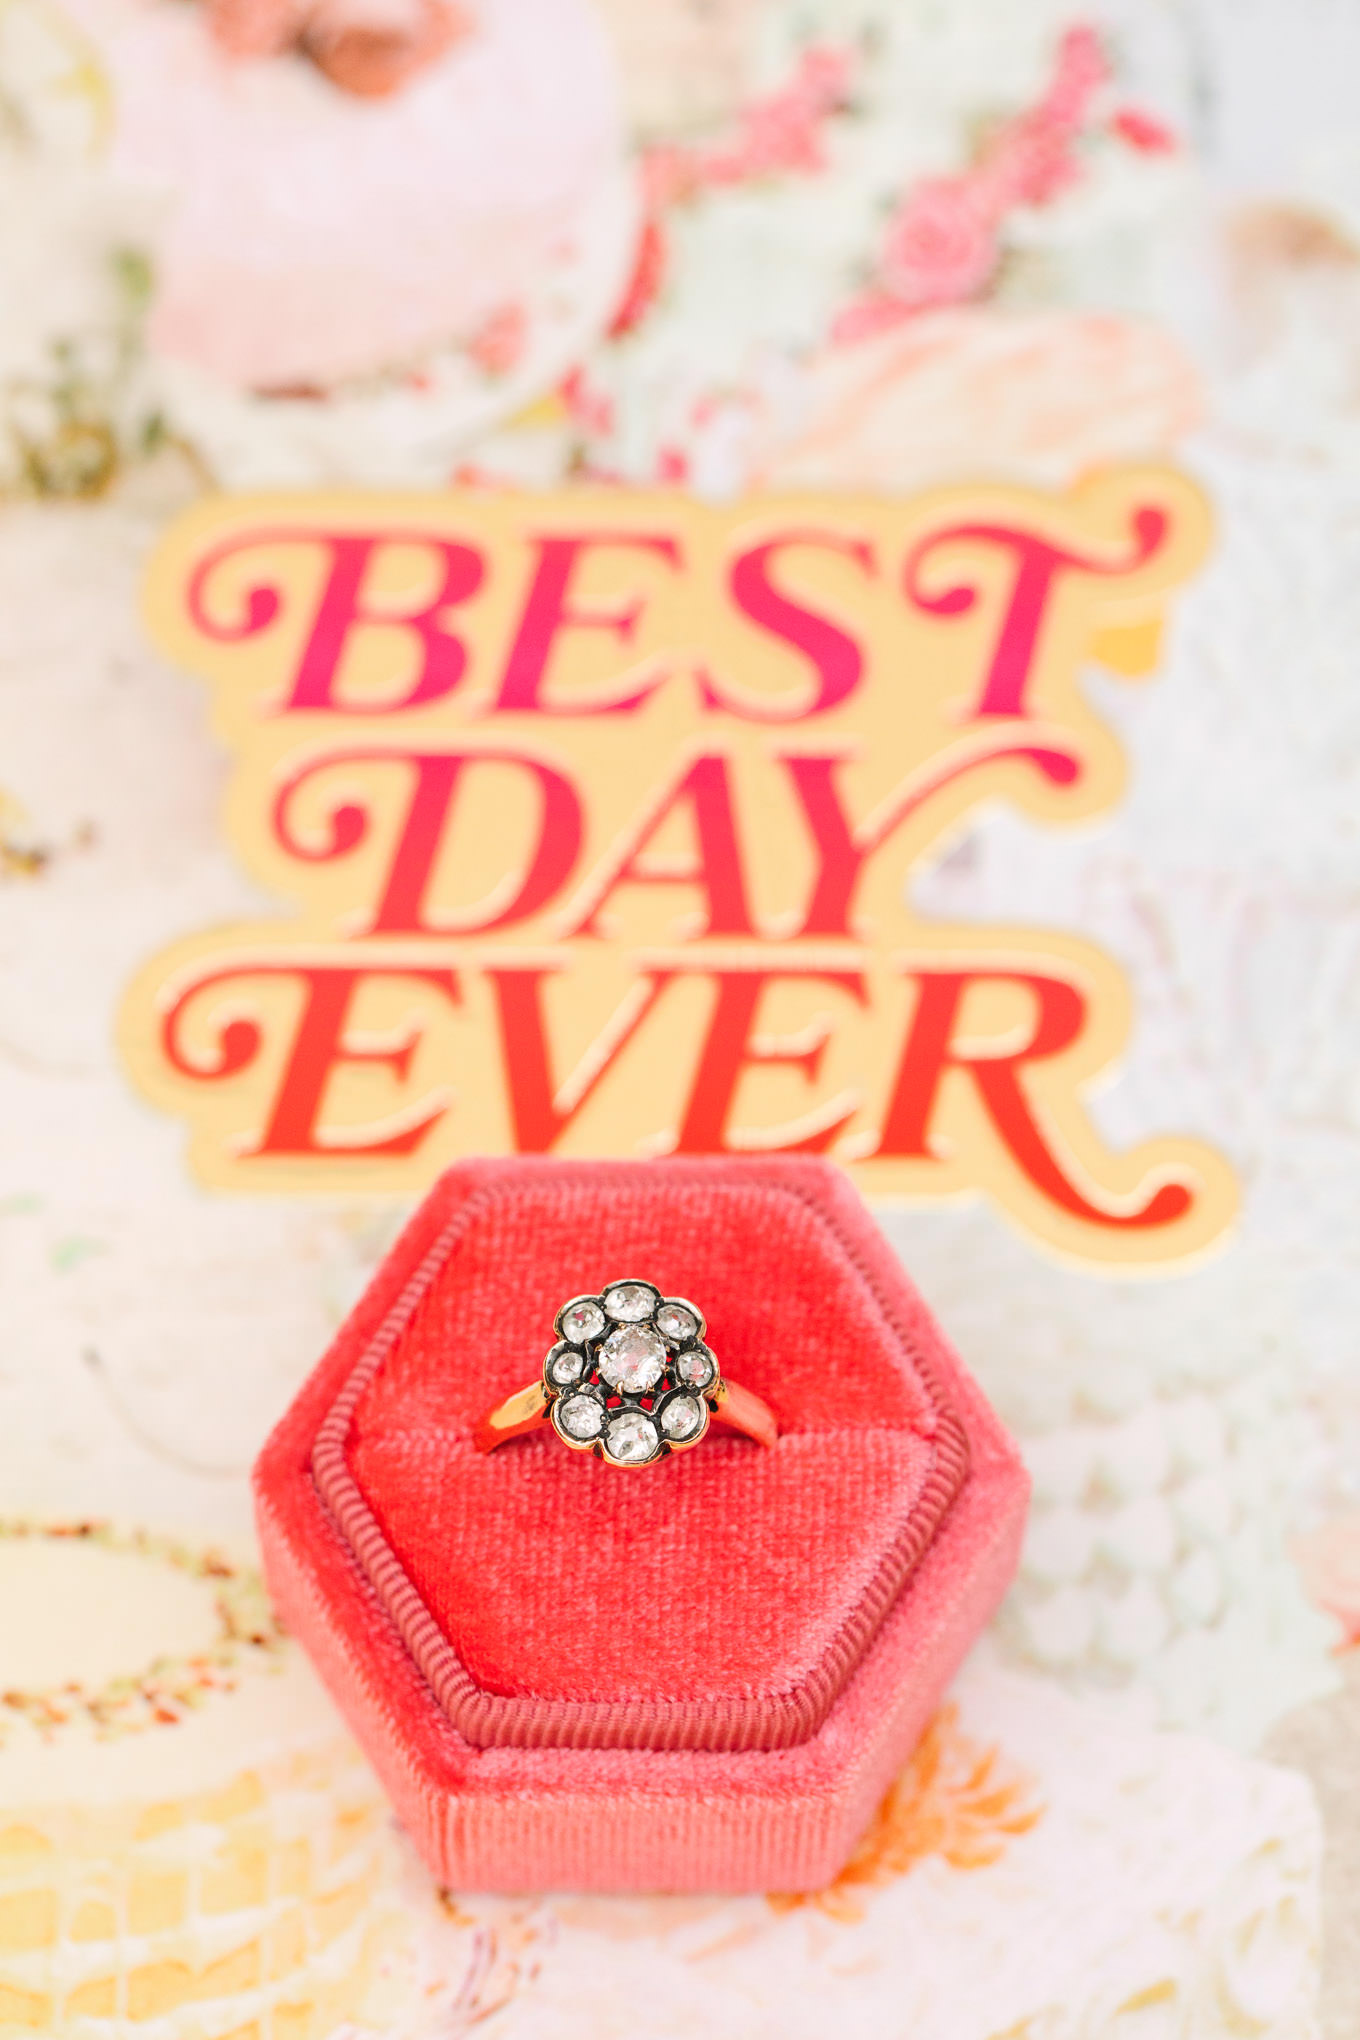 Vintage engagement ring on wedding invitation | Colorful Downtown Los Angeles Valentine Wedding | Los Angeles wedding photographer | #losangeleswedding #colorfulwedding #DTLA #valentinedtla   Source: Mary Costa Photography | Los Angeles